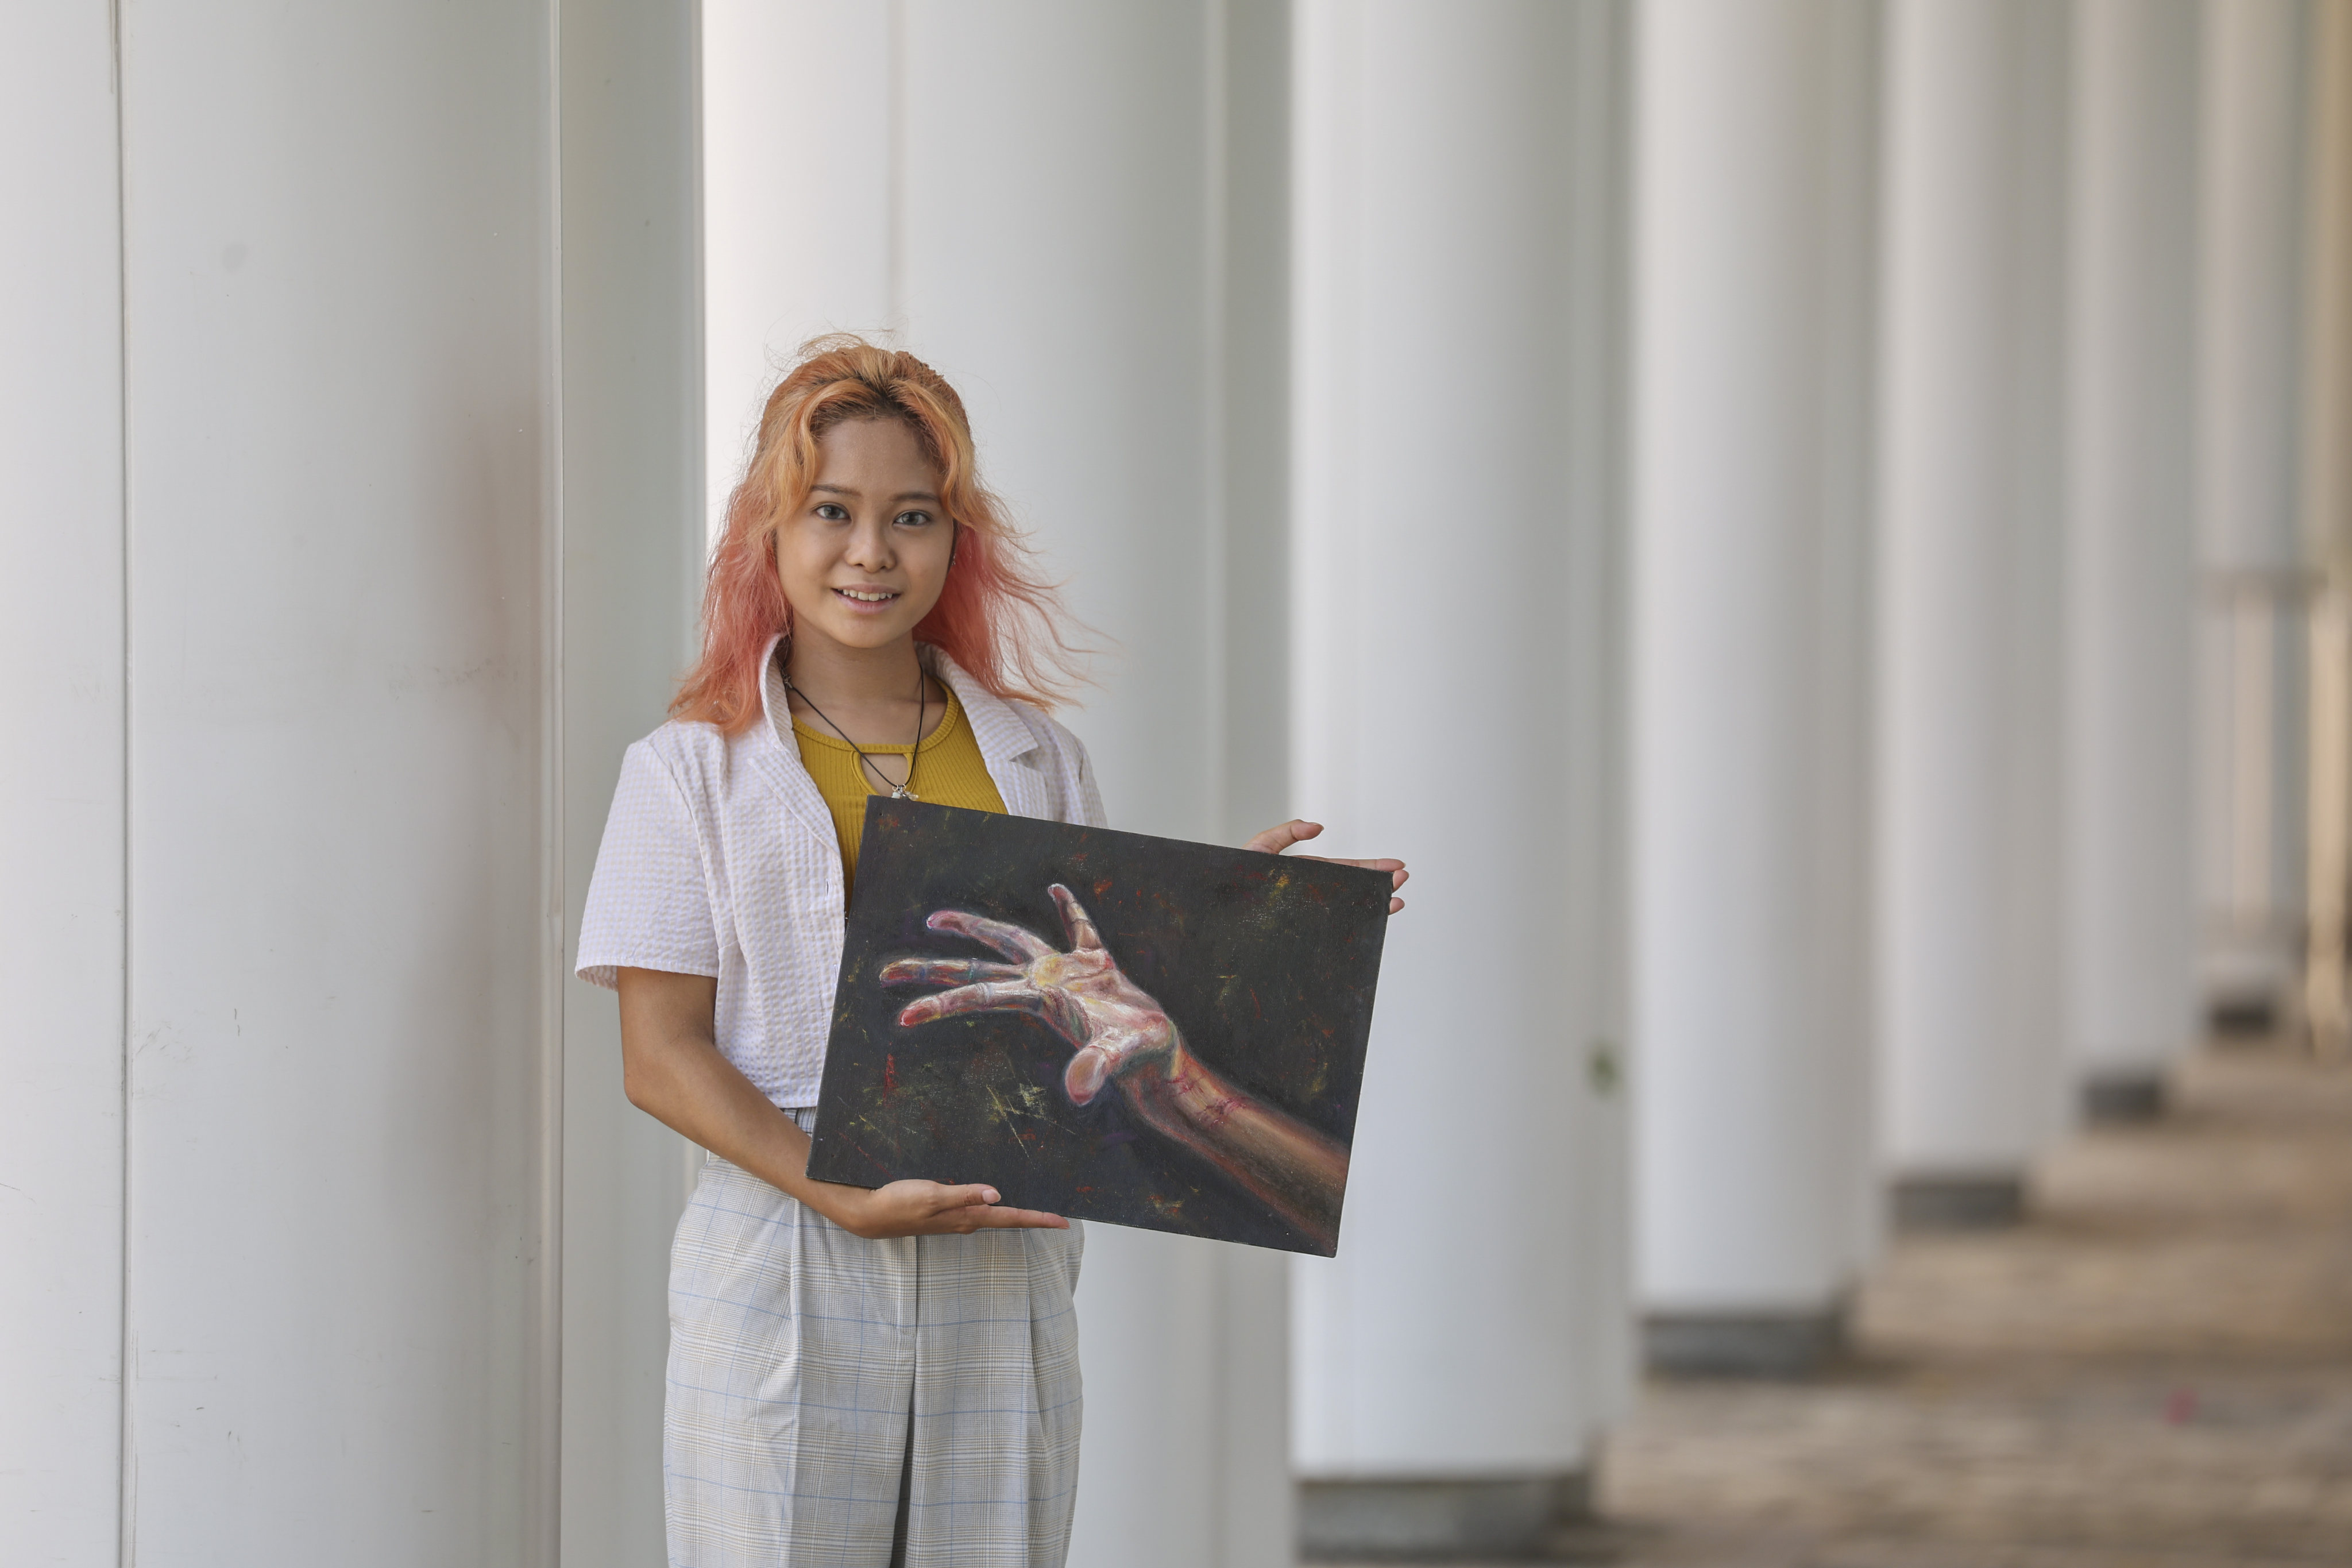 Apart from videos, Ruby Yip says she also uses other mediums, such as drawing, to express her feelings and comment on social issues. Photo: Edmond So